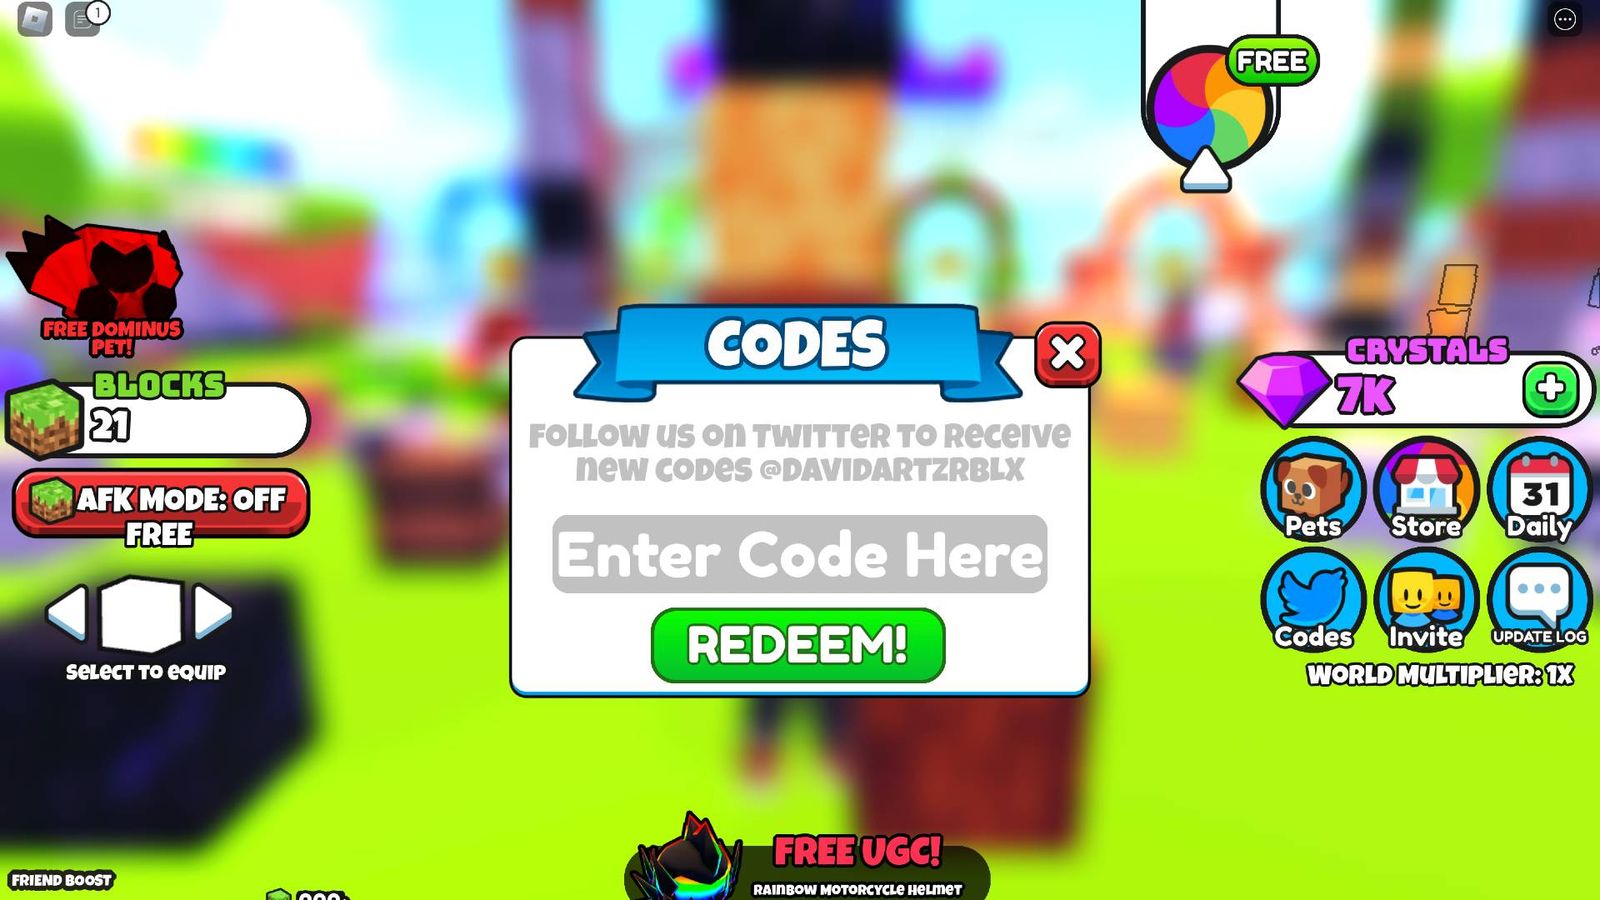 The code redemption page in Block Race.